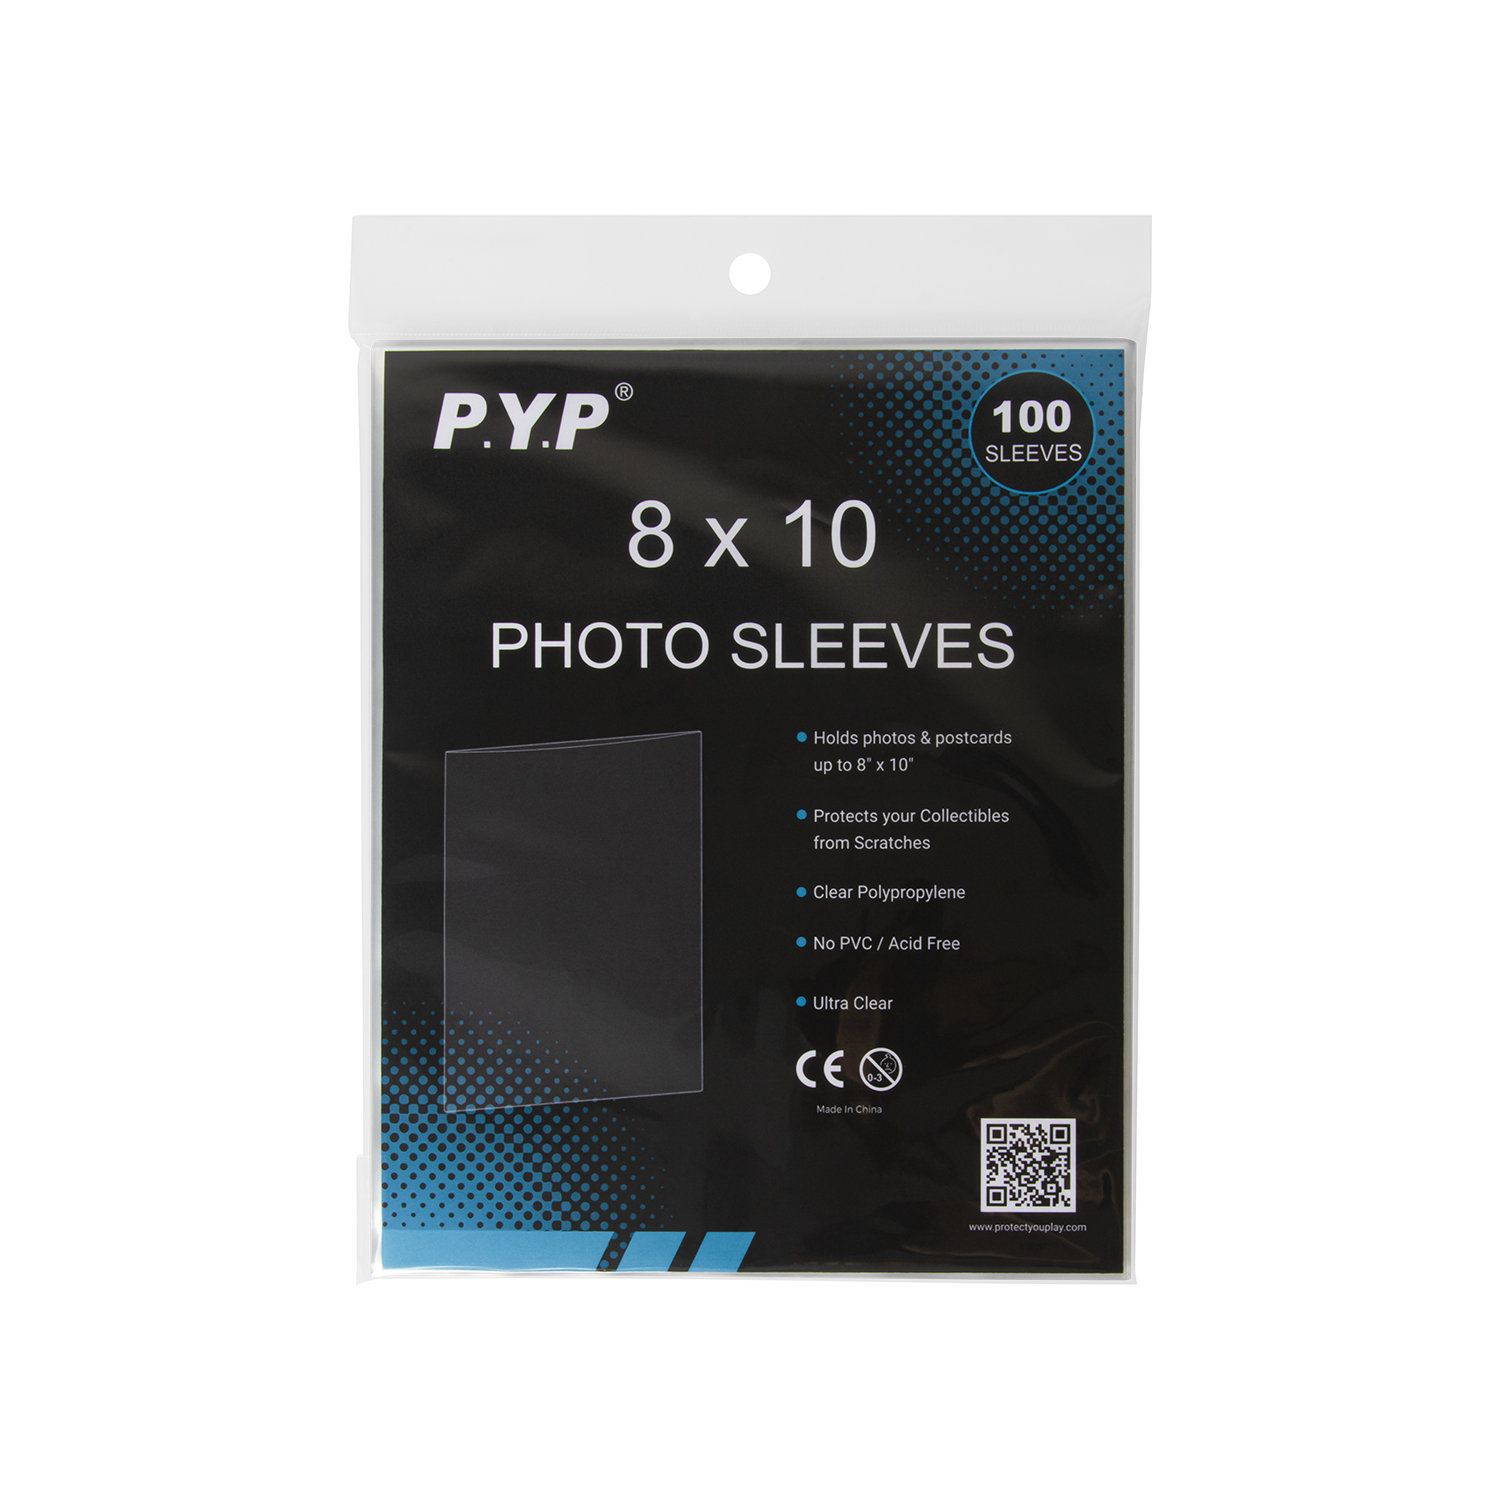 8x10 Photo Sleeves Crystal Clear Archival Plastic Soft Sleeves Polypropylene Poly Bags for Photo Printed